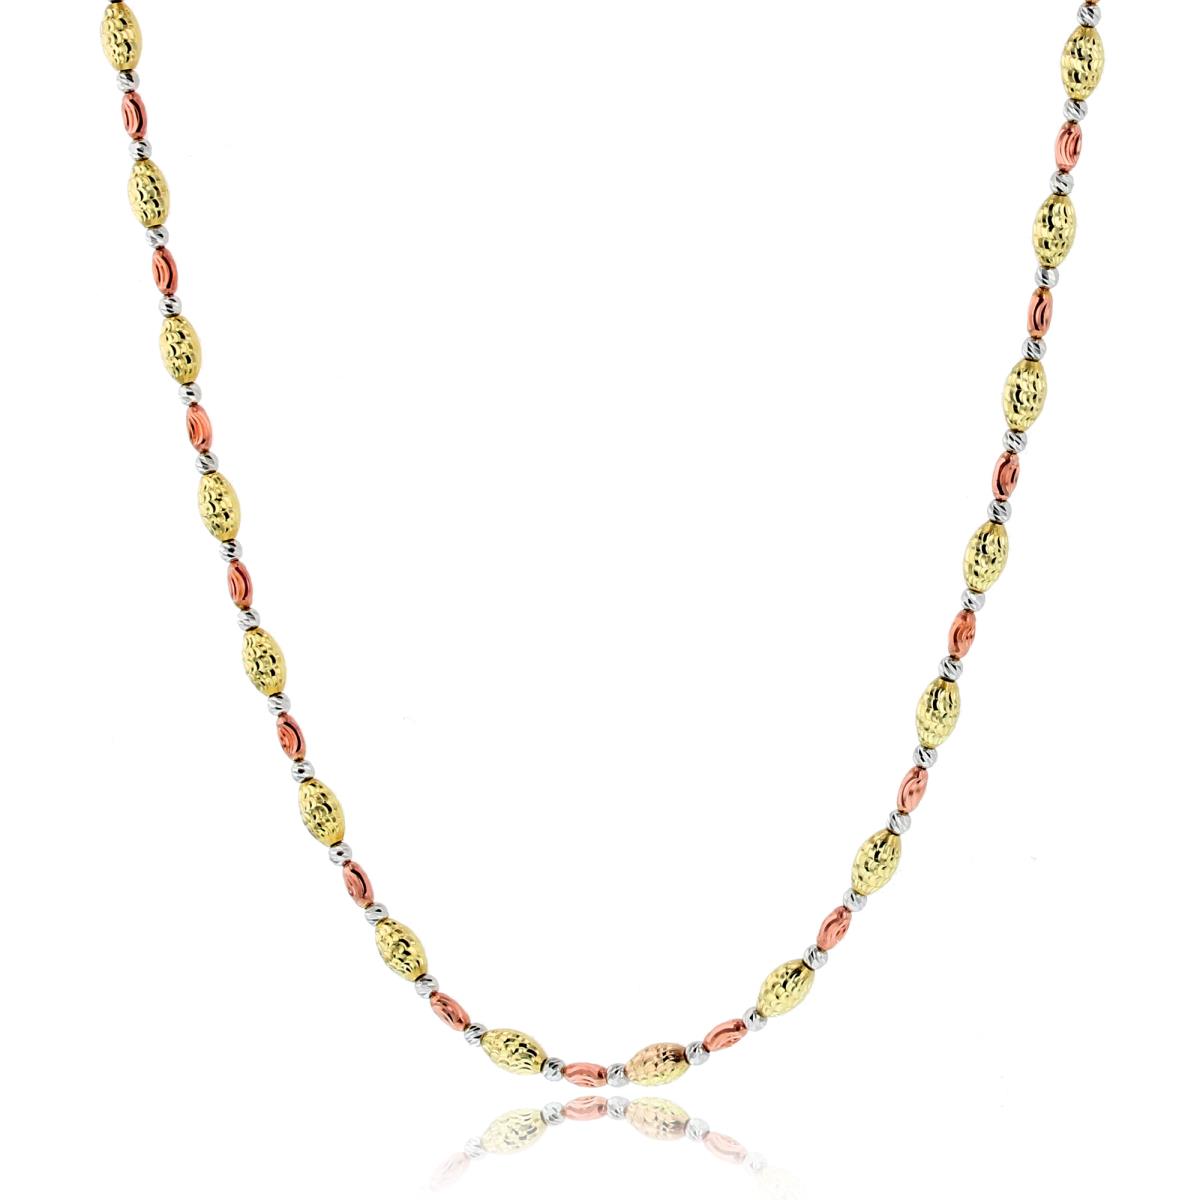 14k Gold Tri-Color Diamond Cut Rice Bead 18" Necklace with 2 inch Extender